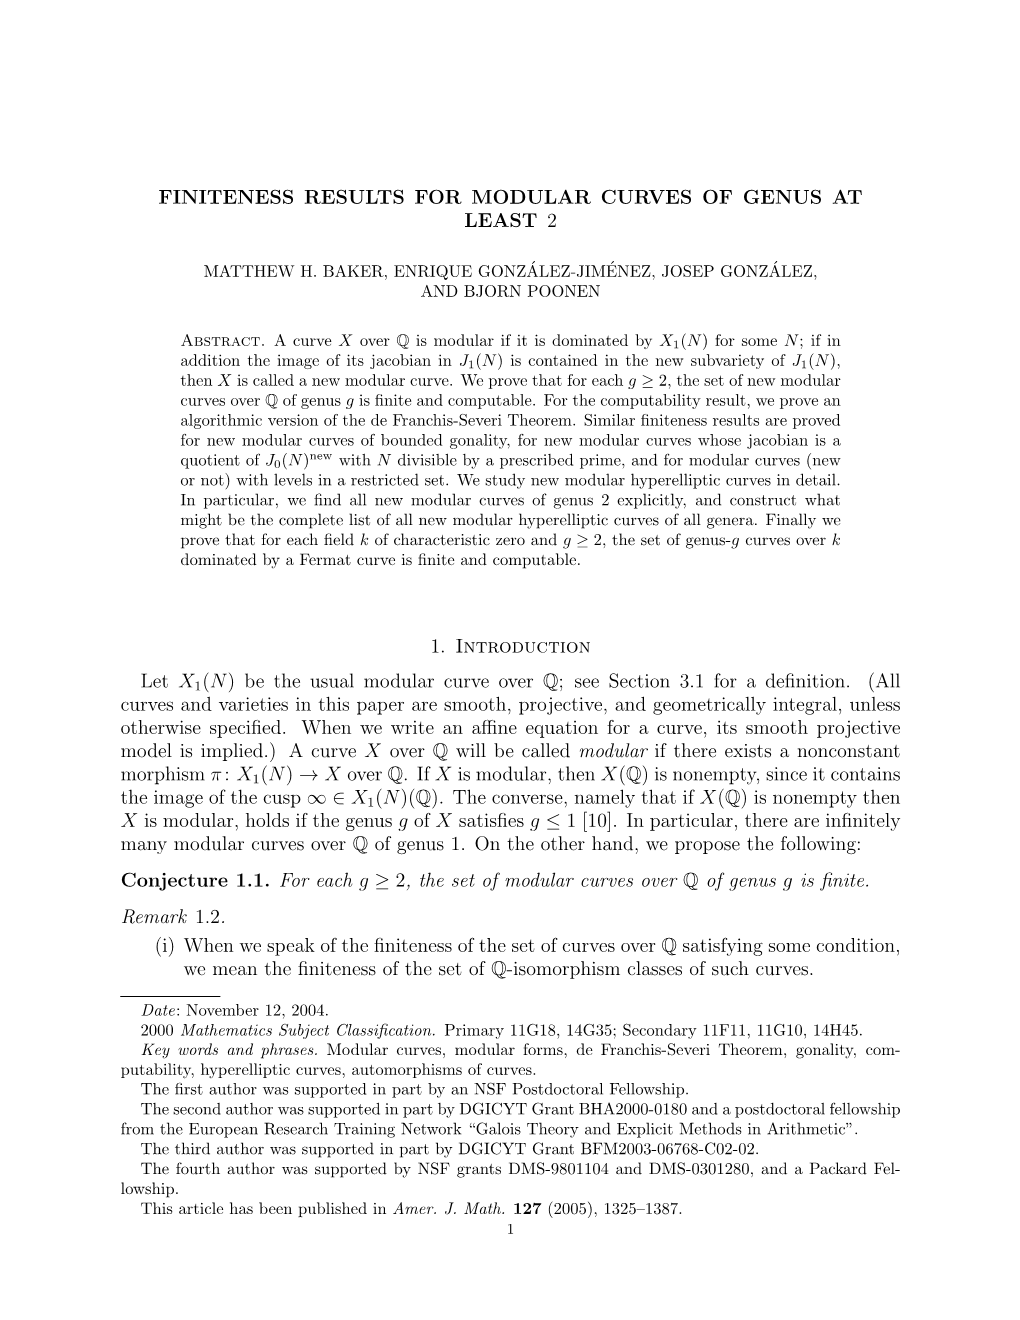 Finiteness Results for Modular Curves of Genus at Least 2